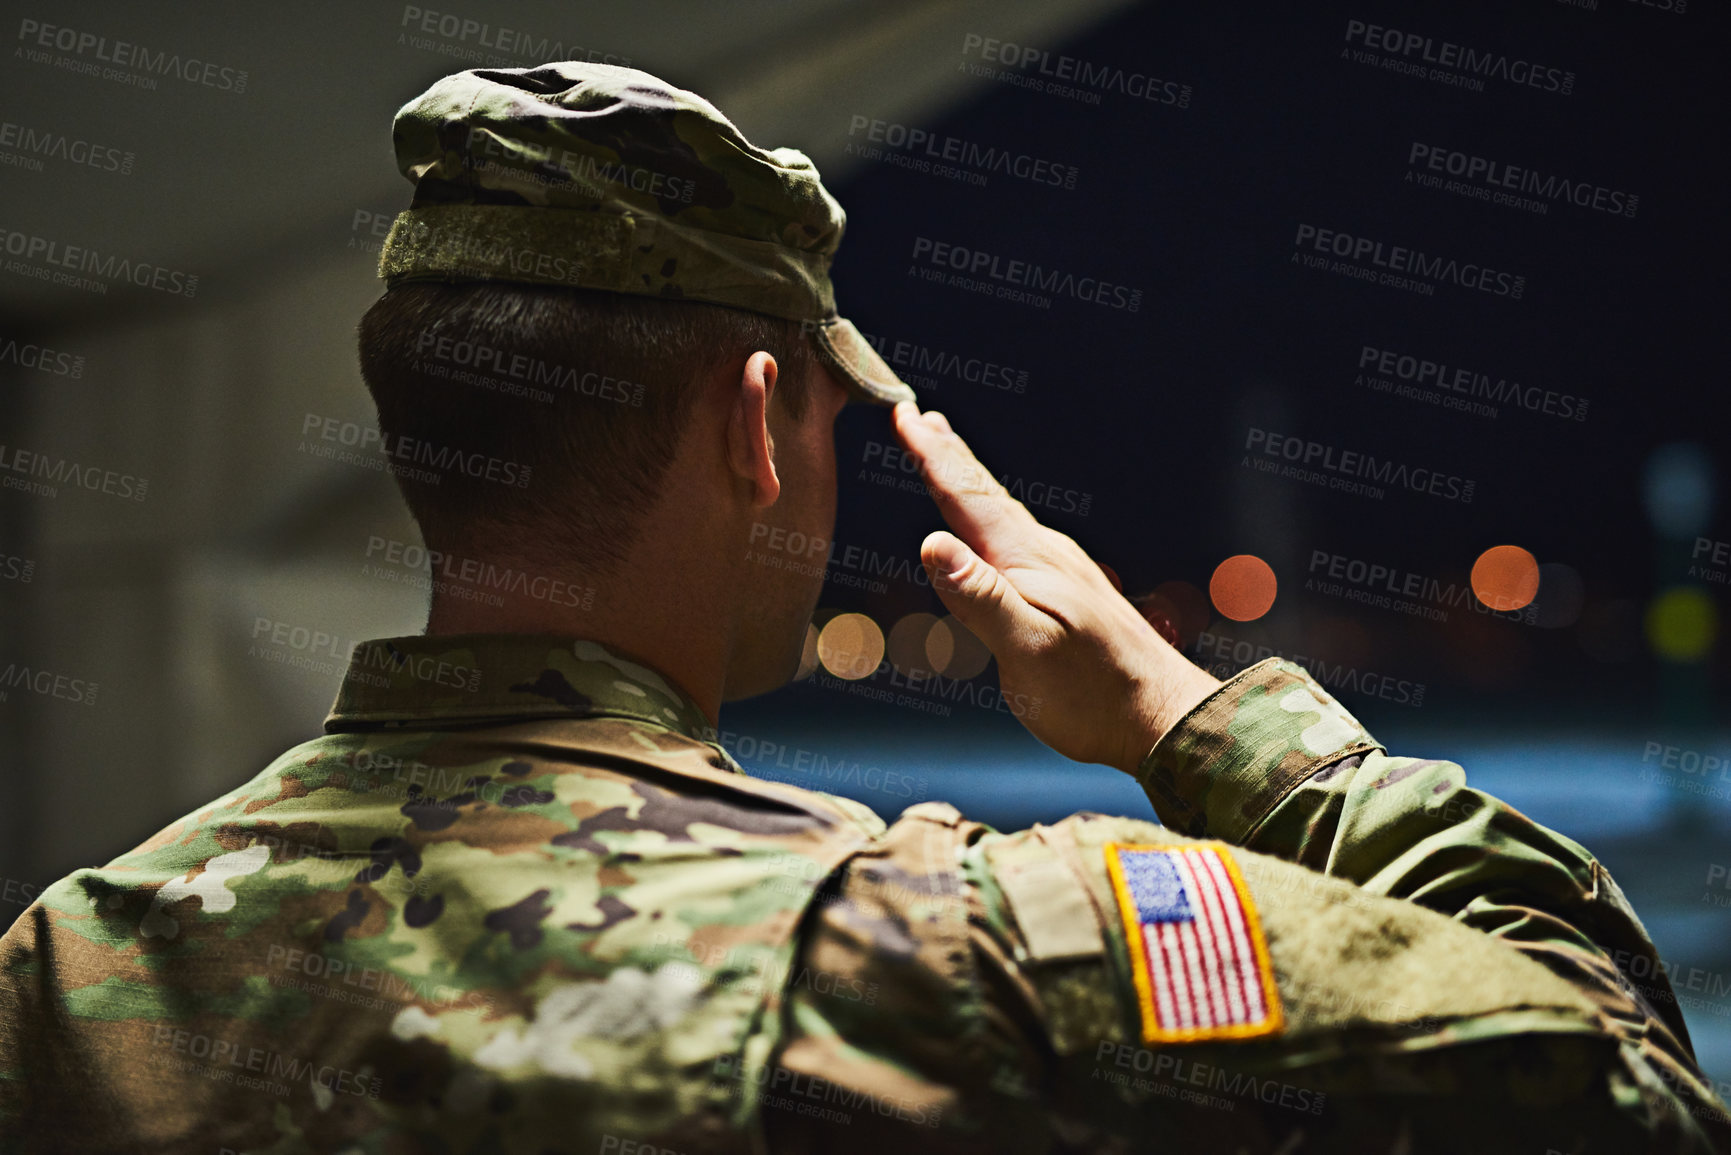 Buy stock photo Rearview shot of a young soldier standing at a military academy and saluting